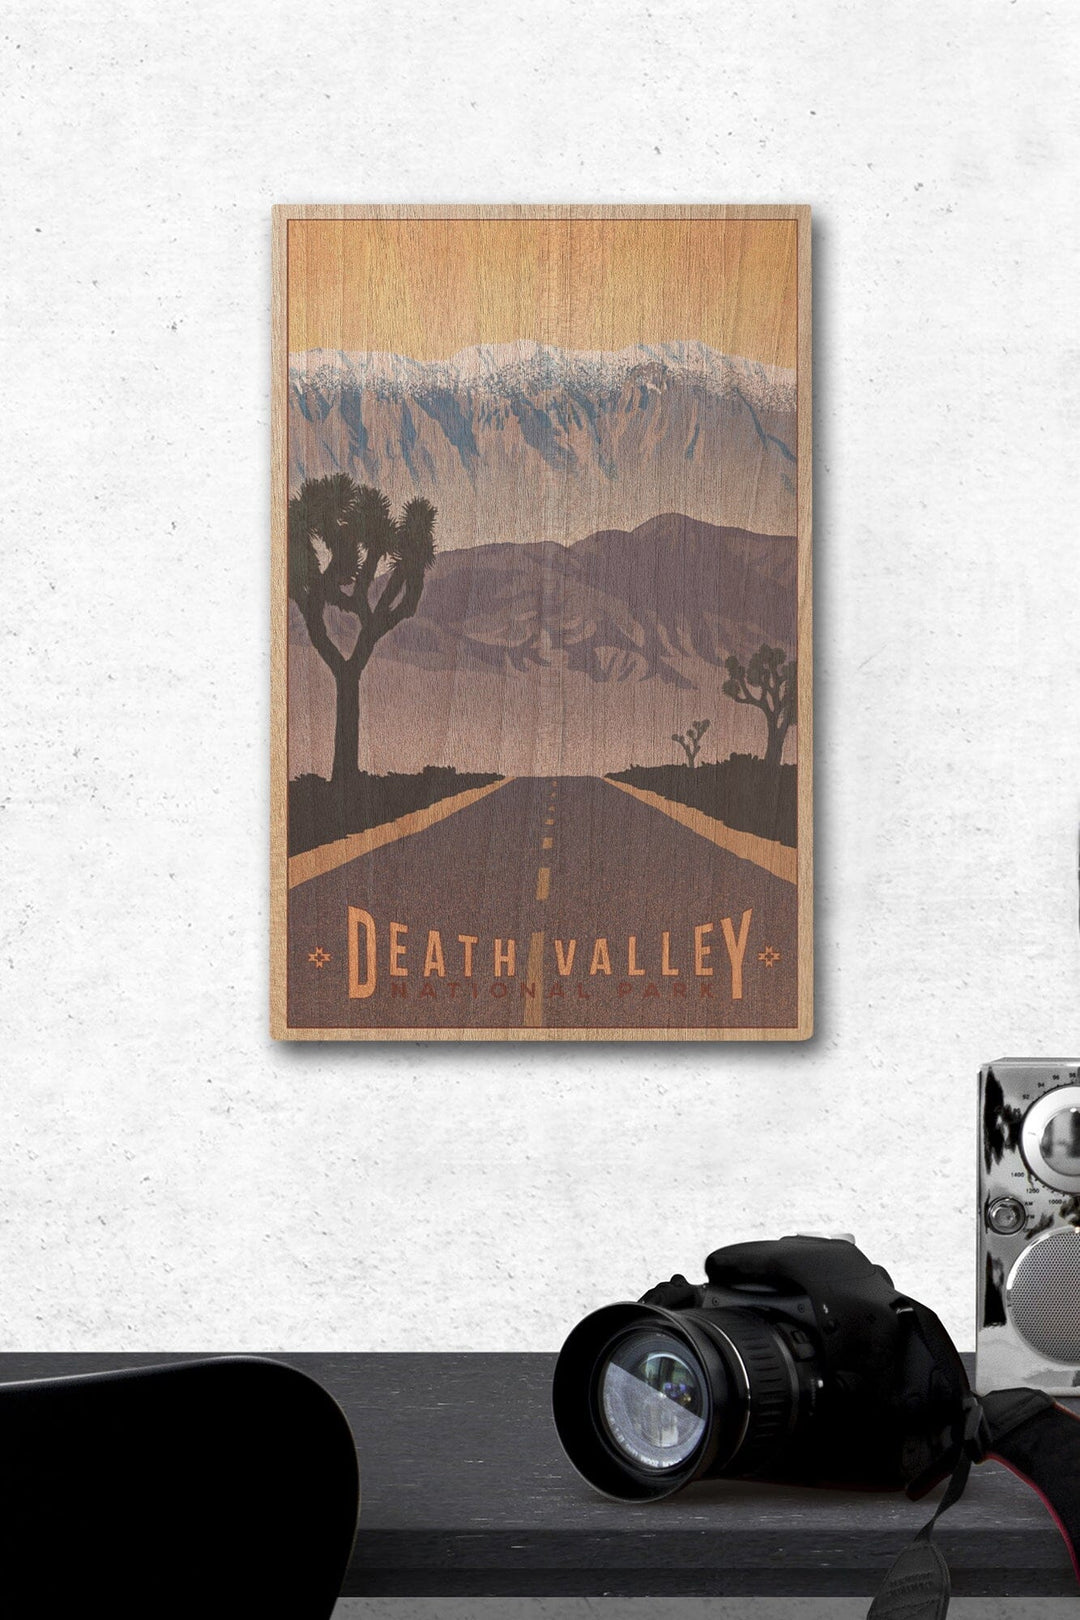 Death Valley National Park, California, Lithograph, Lantern Press Artwork, Wood Signs and Postcards Wood Lantern Press 12 x 18 Wood Gallery Print 